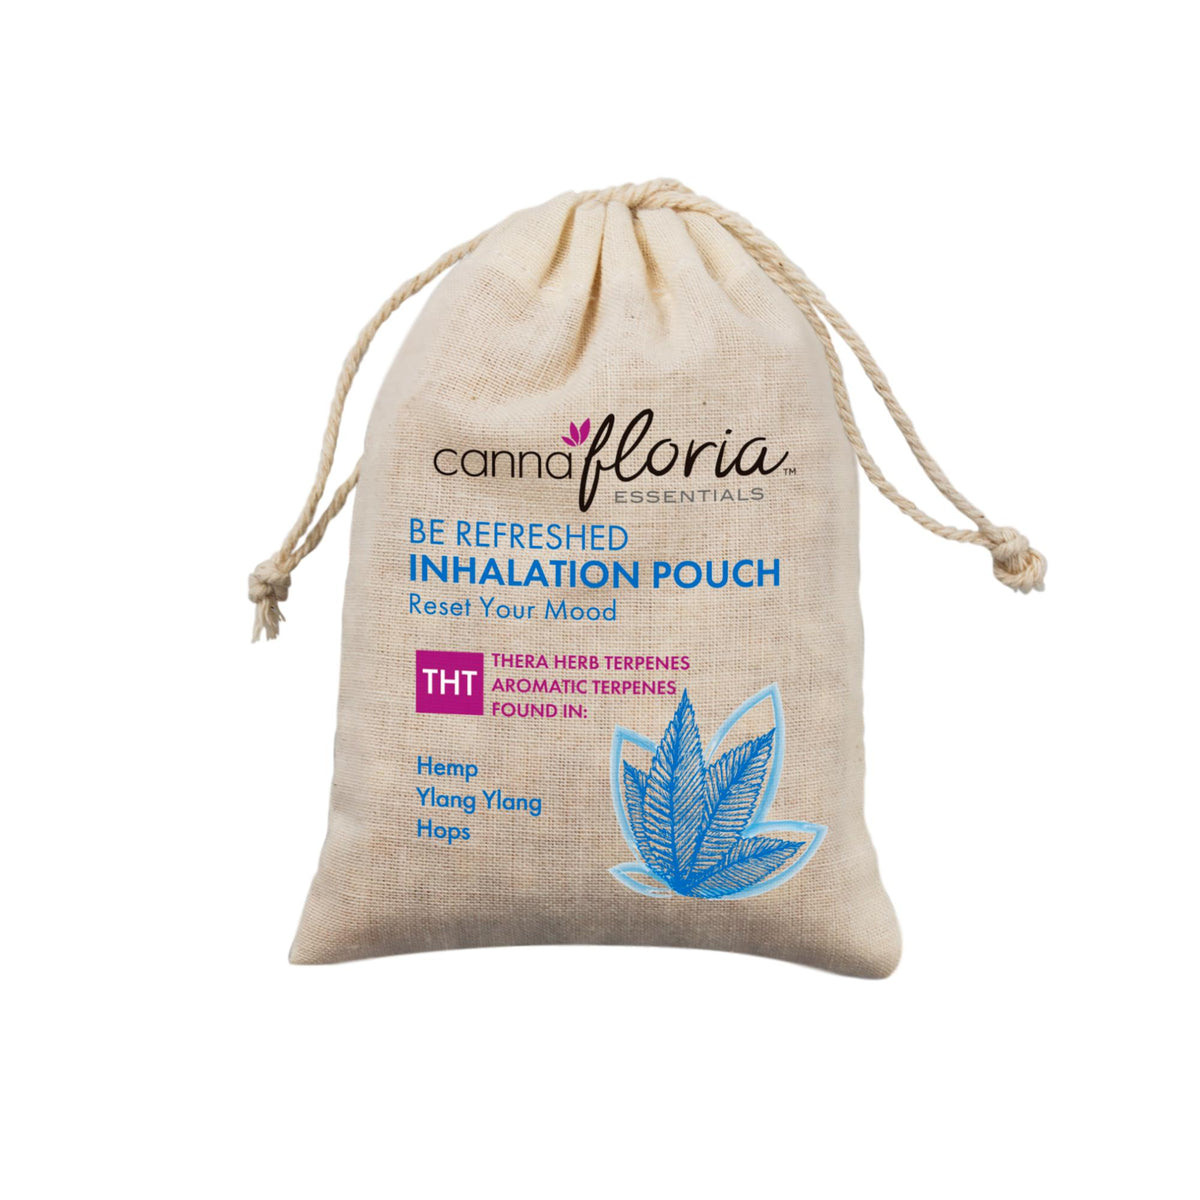 Cannafloria Inhalation Pouch, Be Refreshed, 2 Pack